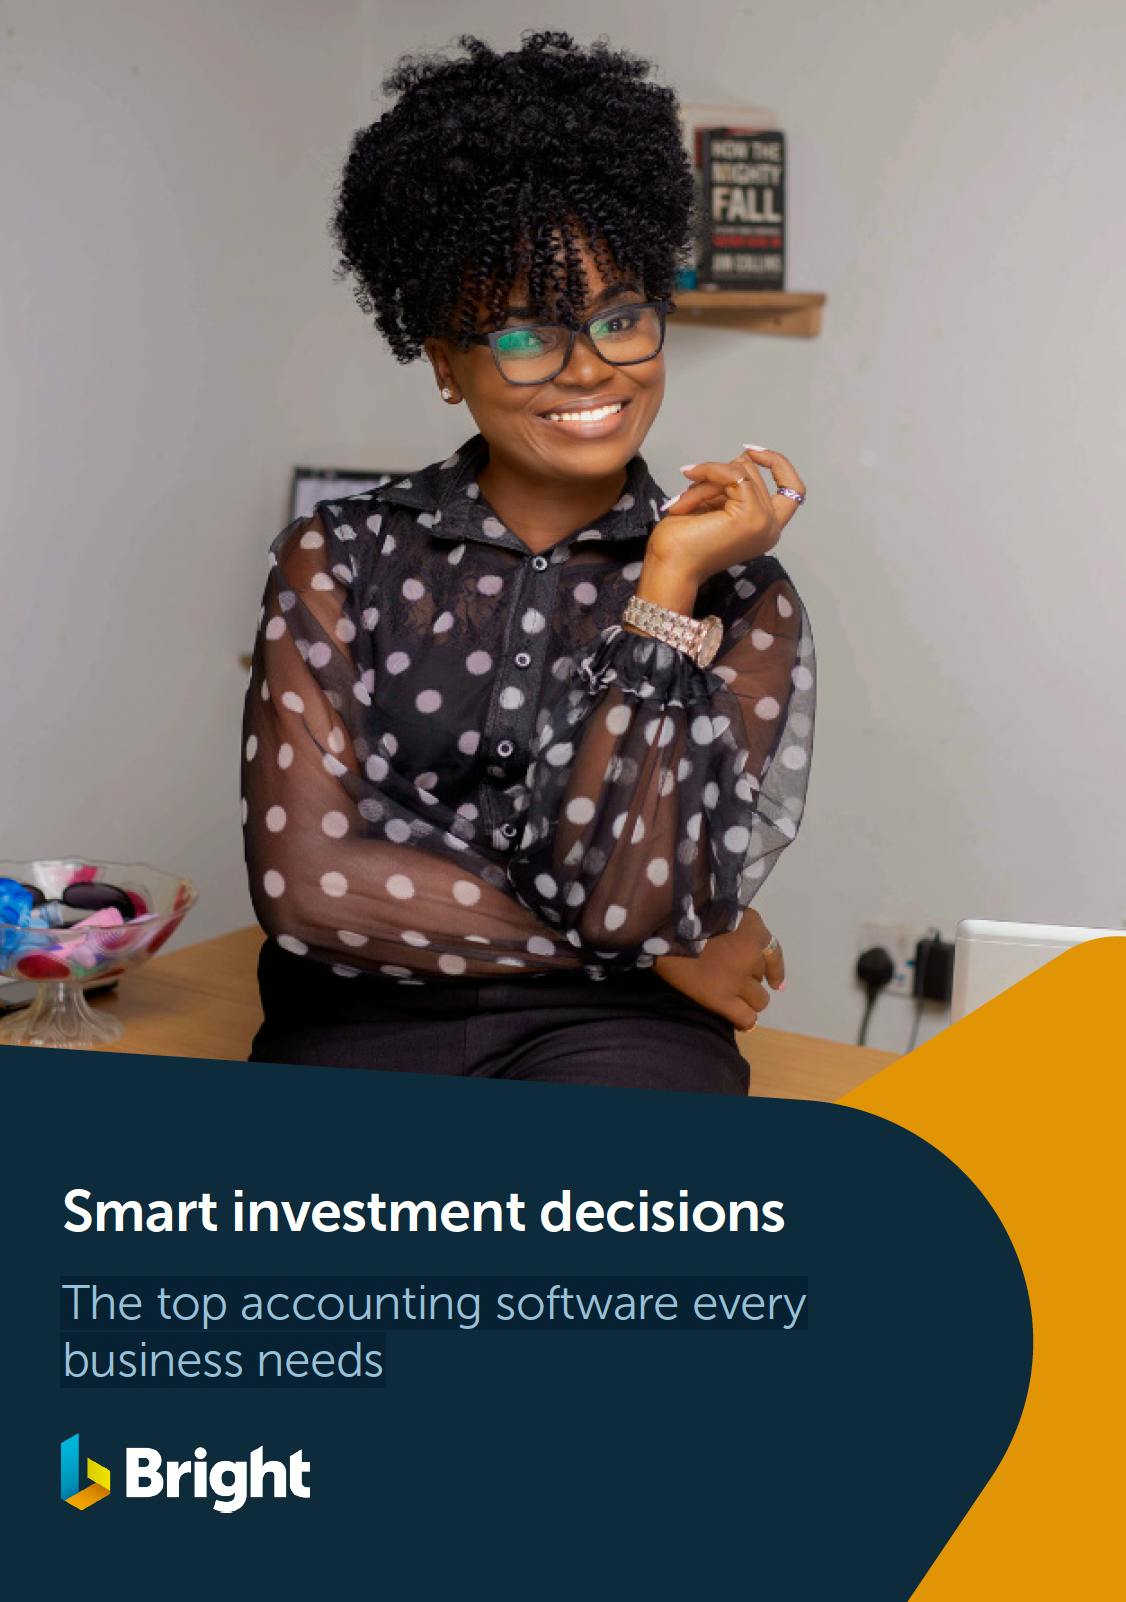 Smart investment decisions: The top accounting software every business needs